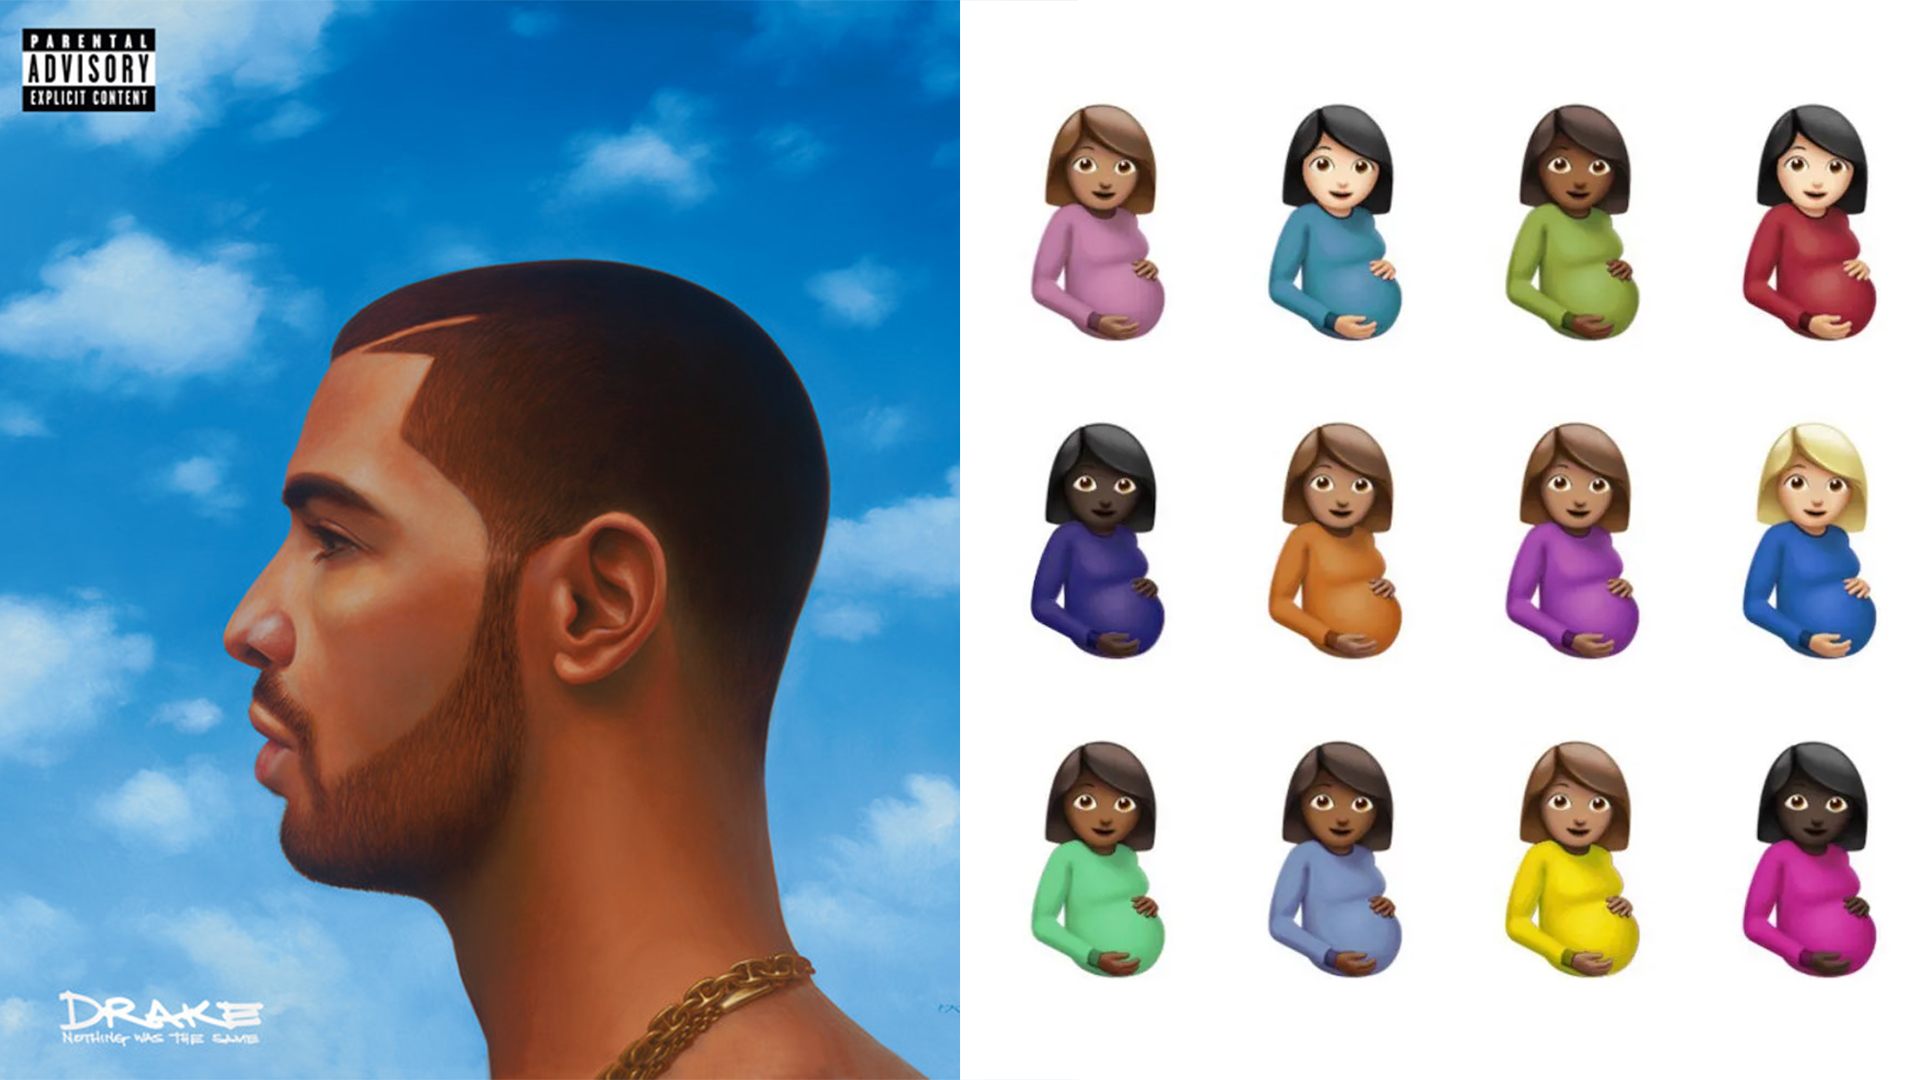 Album art for Drake's 'Certified Lover Boy' and 'Nothing Was the Same'.